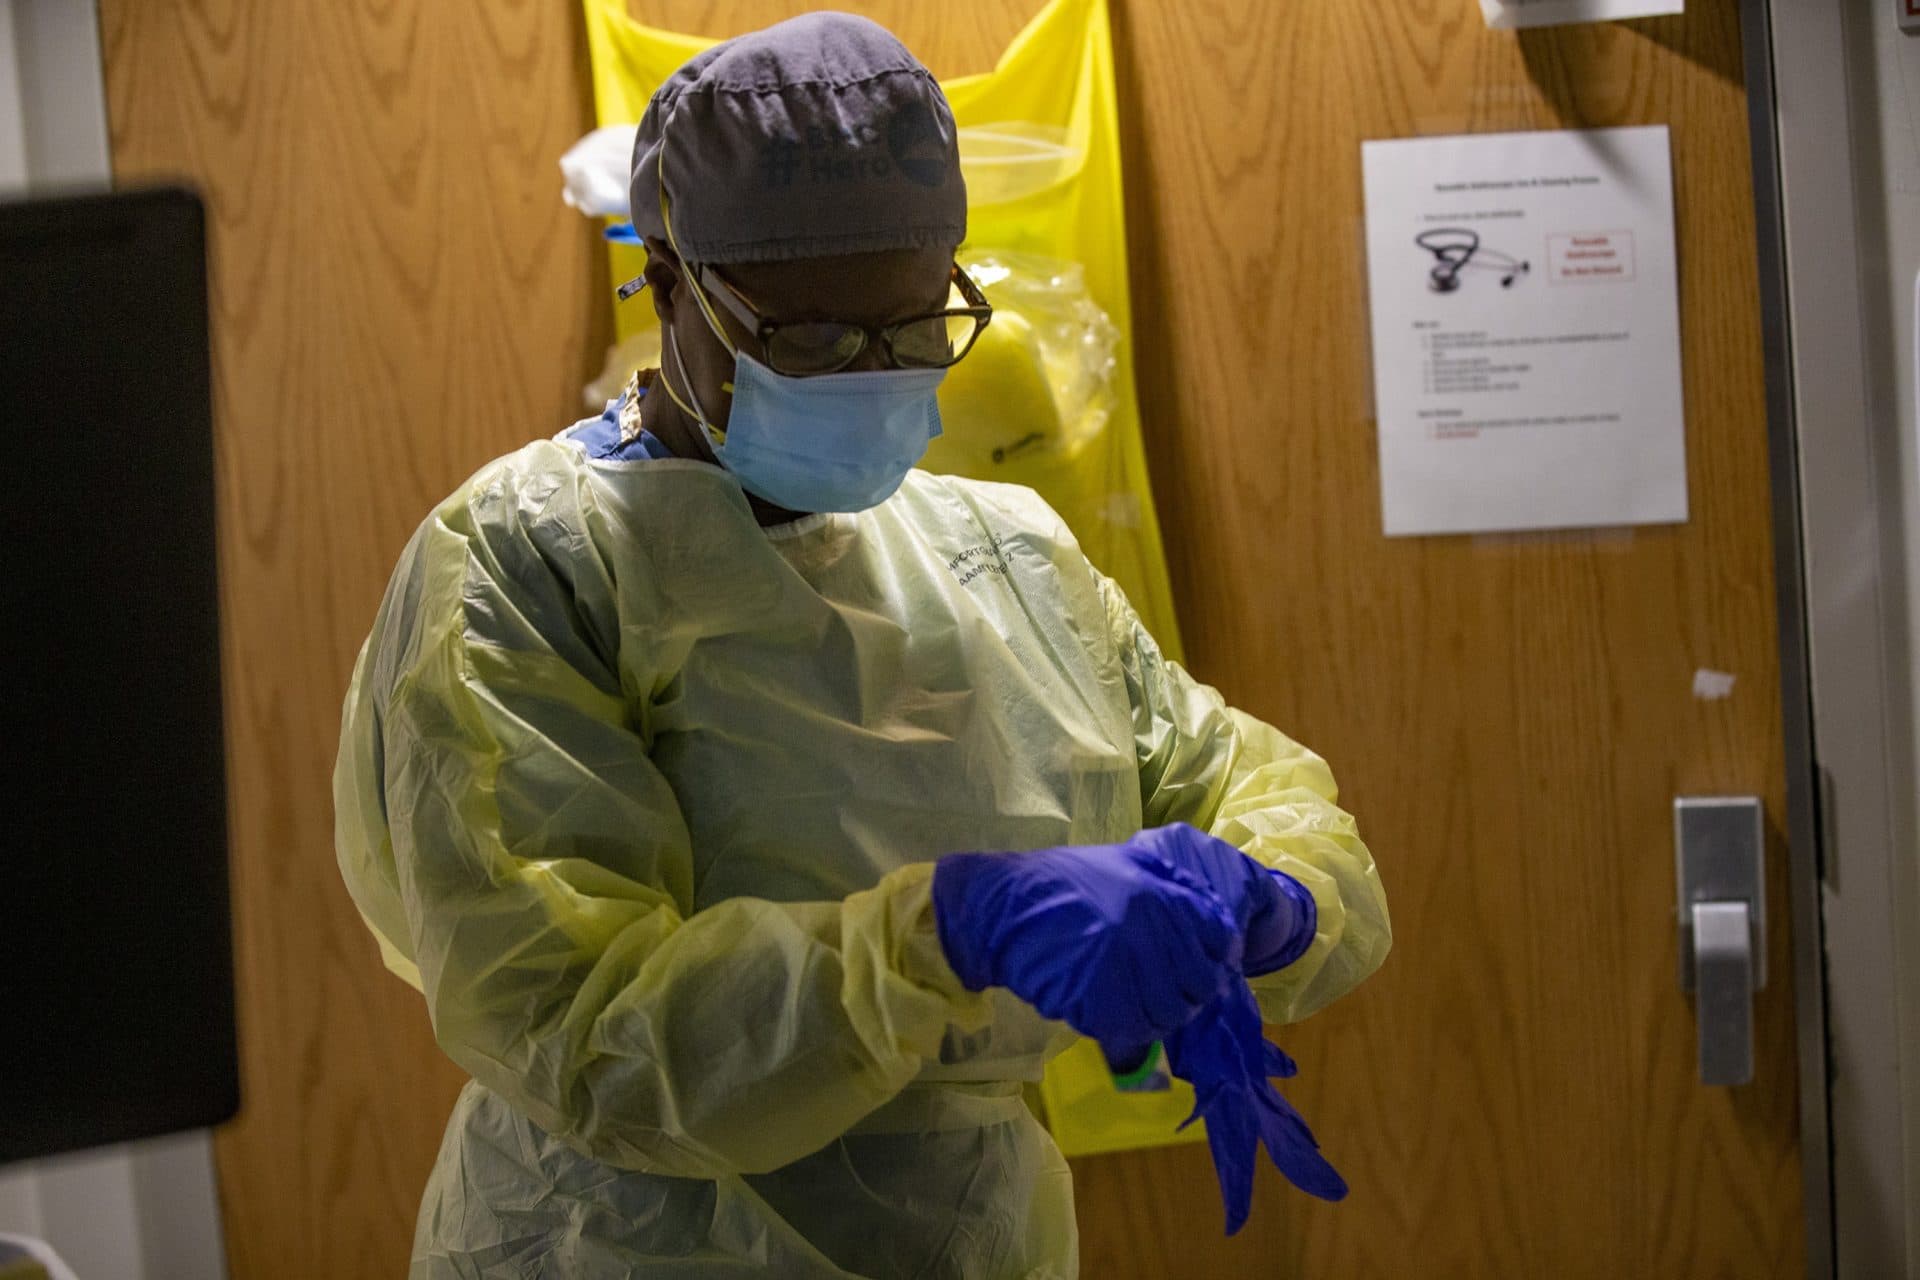 Boston Medical Center registered nurse Ellen Stephenson puts on personal protective equipment as she prepares to enter a room of a COVID-19 patient. (Jesse Costa/WBUR)